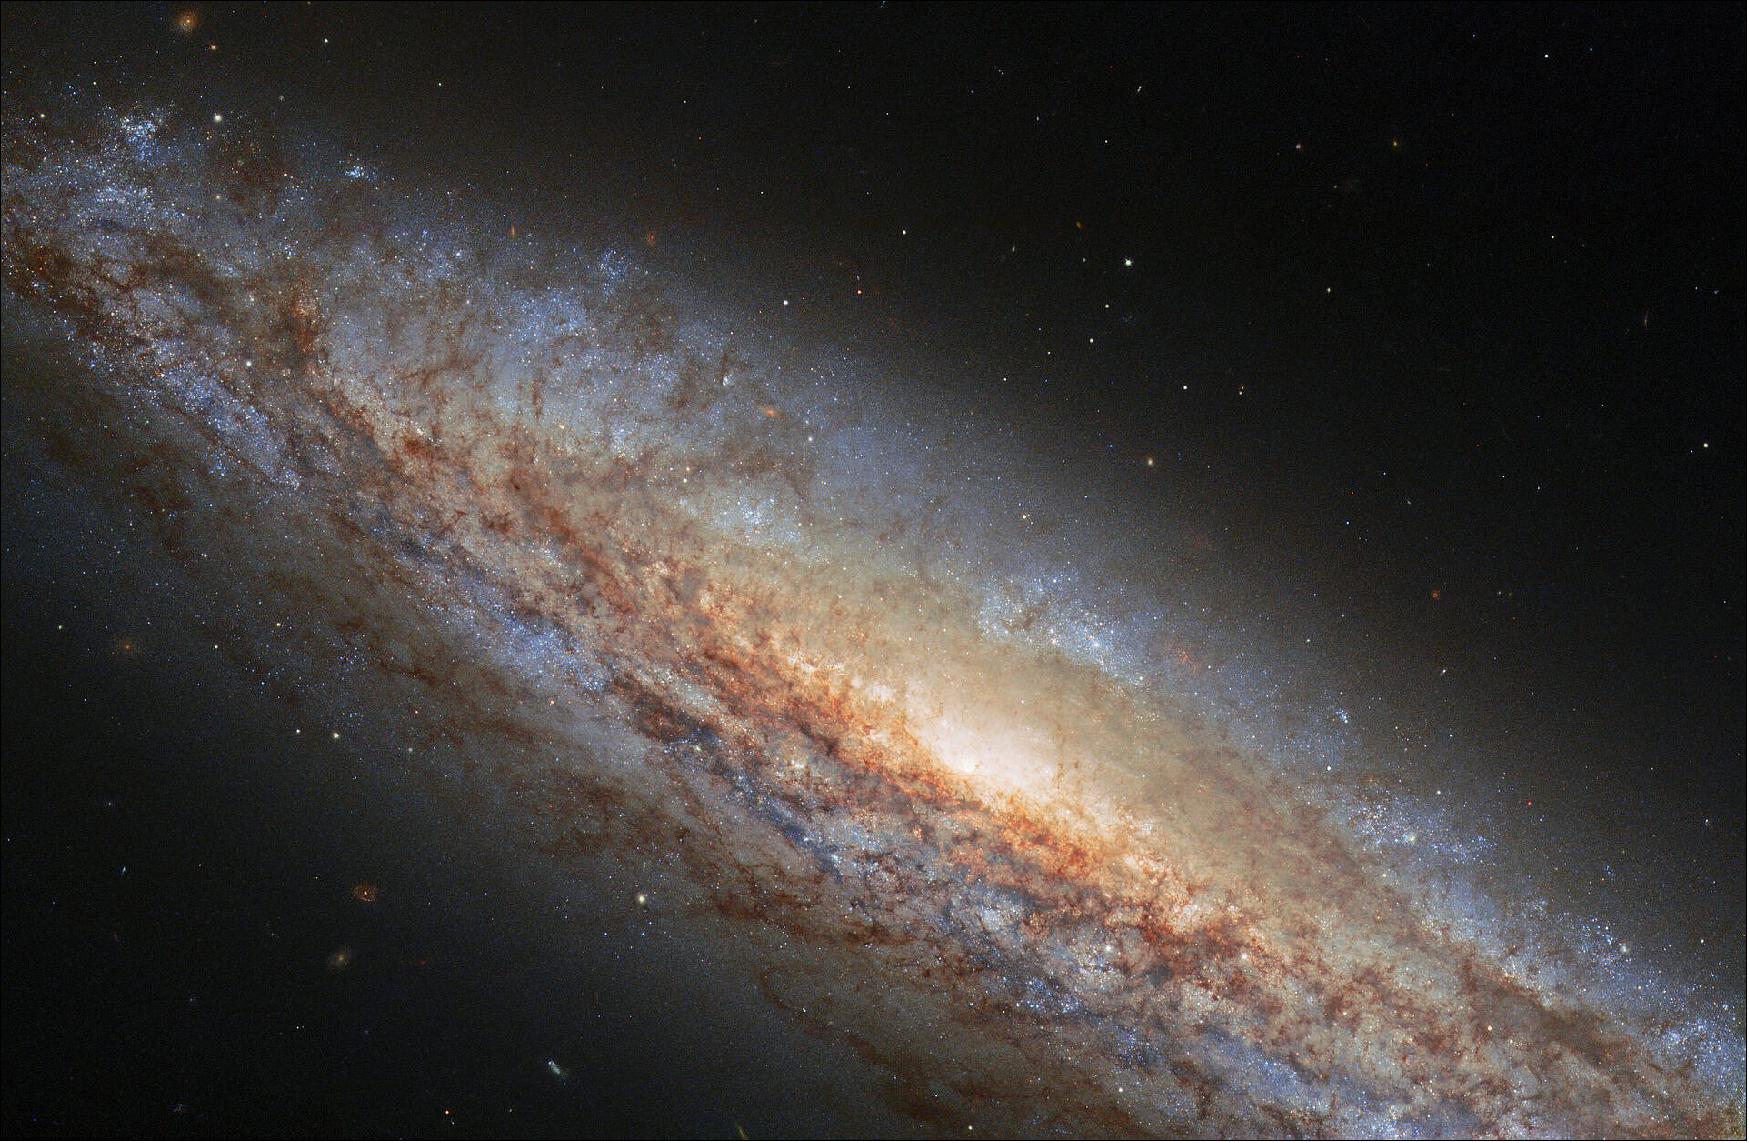 Figure 38: NGC 4666 takes center stage in this image from the NASA/ESA Hubble Space Telescope. This majestic spiral galaxy lies about 80 million light-years away in the constellation Virgo, and is undergoing a particularly intense episode of star formation. Astronomers refer to galaxies which are forming stars anomalously quickly as starburst galaxies. NGC 4666’s starburst is thought to be due to gravitational interactions with its unruly neighbors — including the nearby galaxy NGC 4668 and a dwarf galaxy (image credit: ESA/Hubble & NASA, O. Graur; CC BY 4.0 - Acknowledgement: L. Shatz)